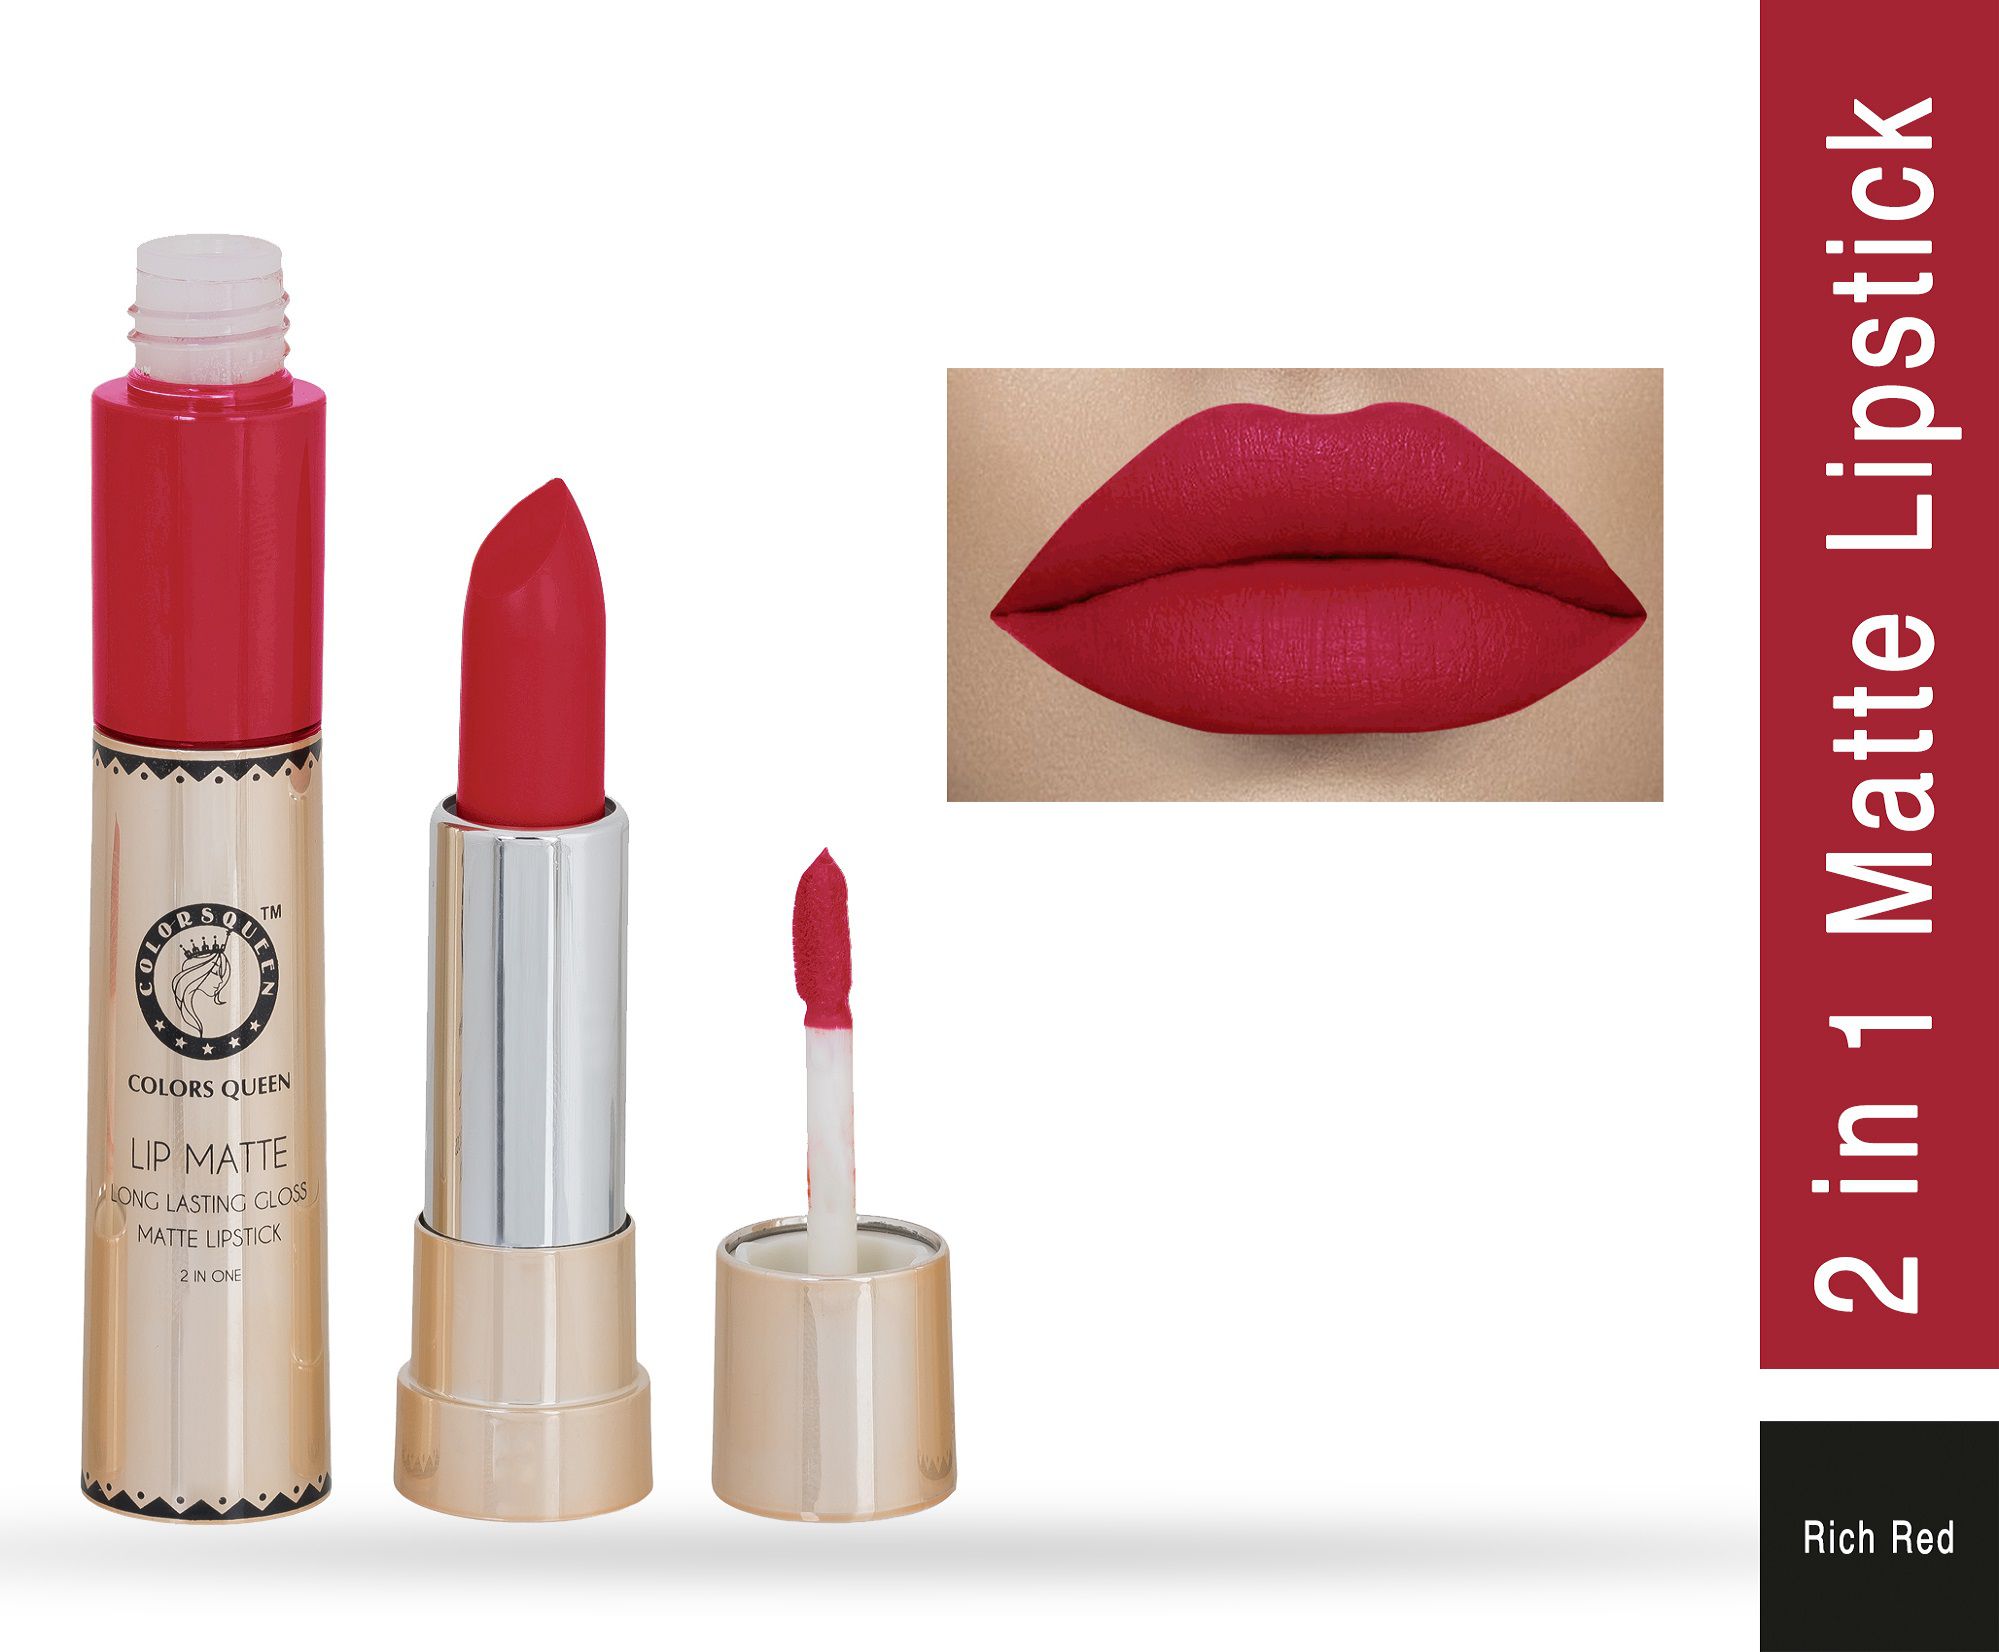     			Colors Queen 2 in 1 Lipstick Rich Red Shade - 39 | SPF 15 8 g